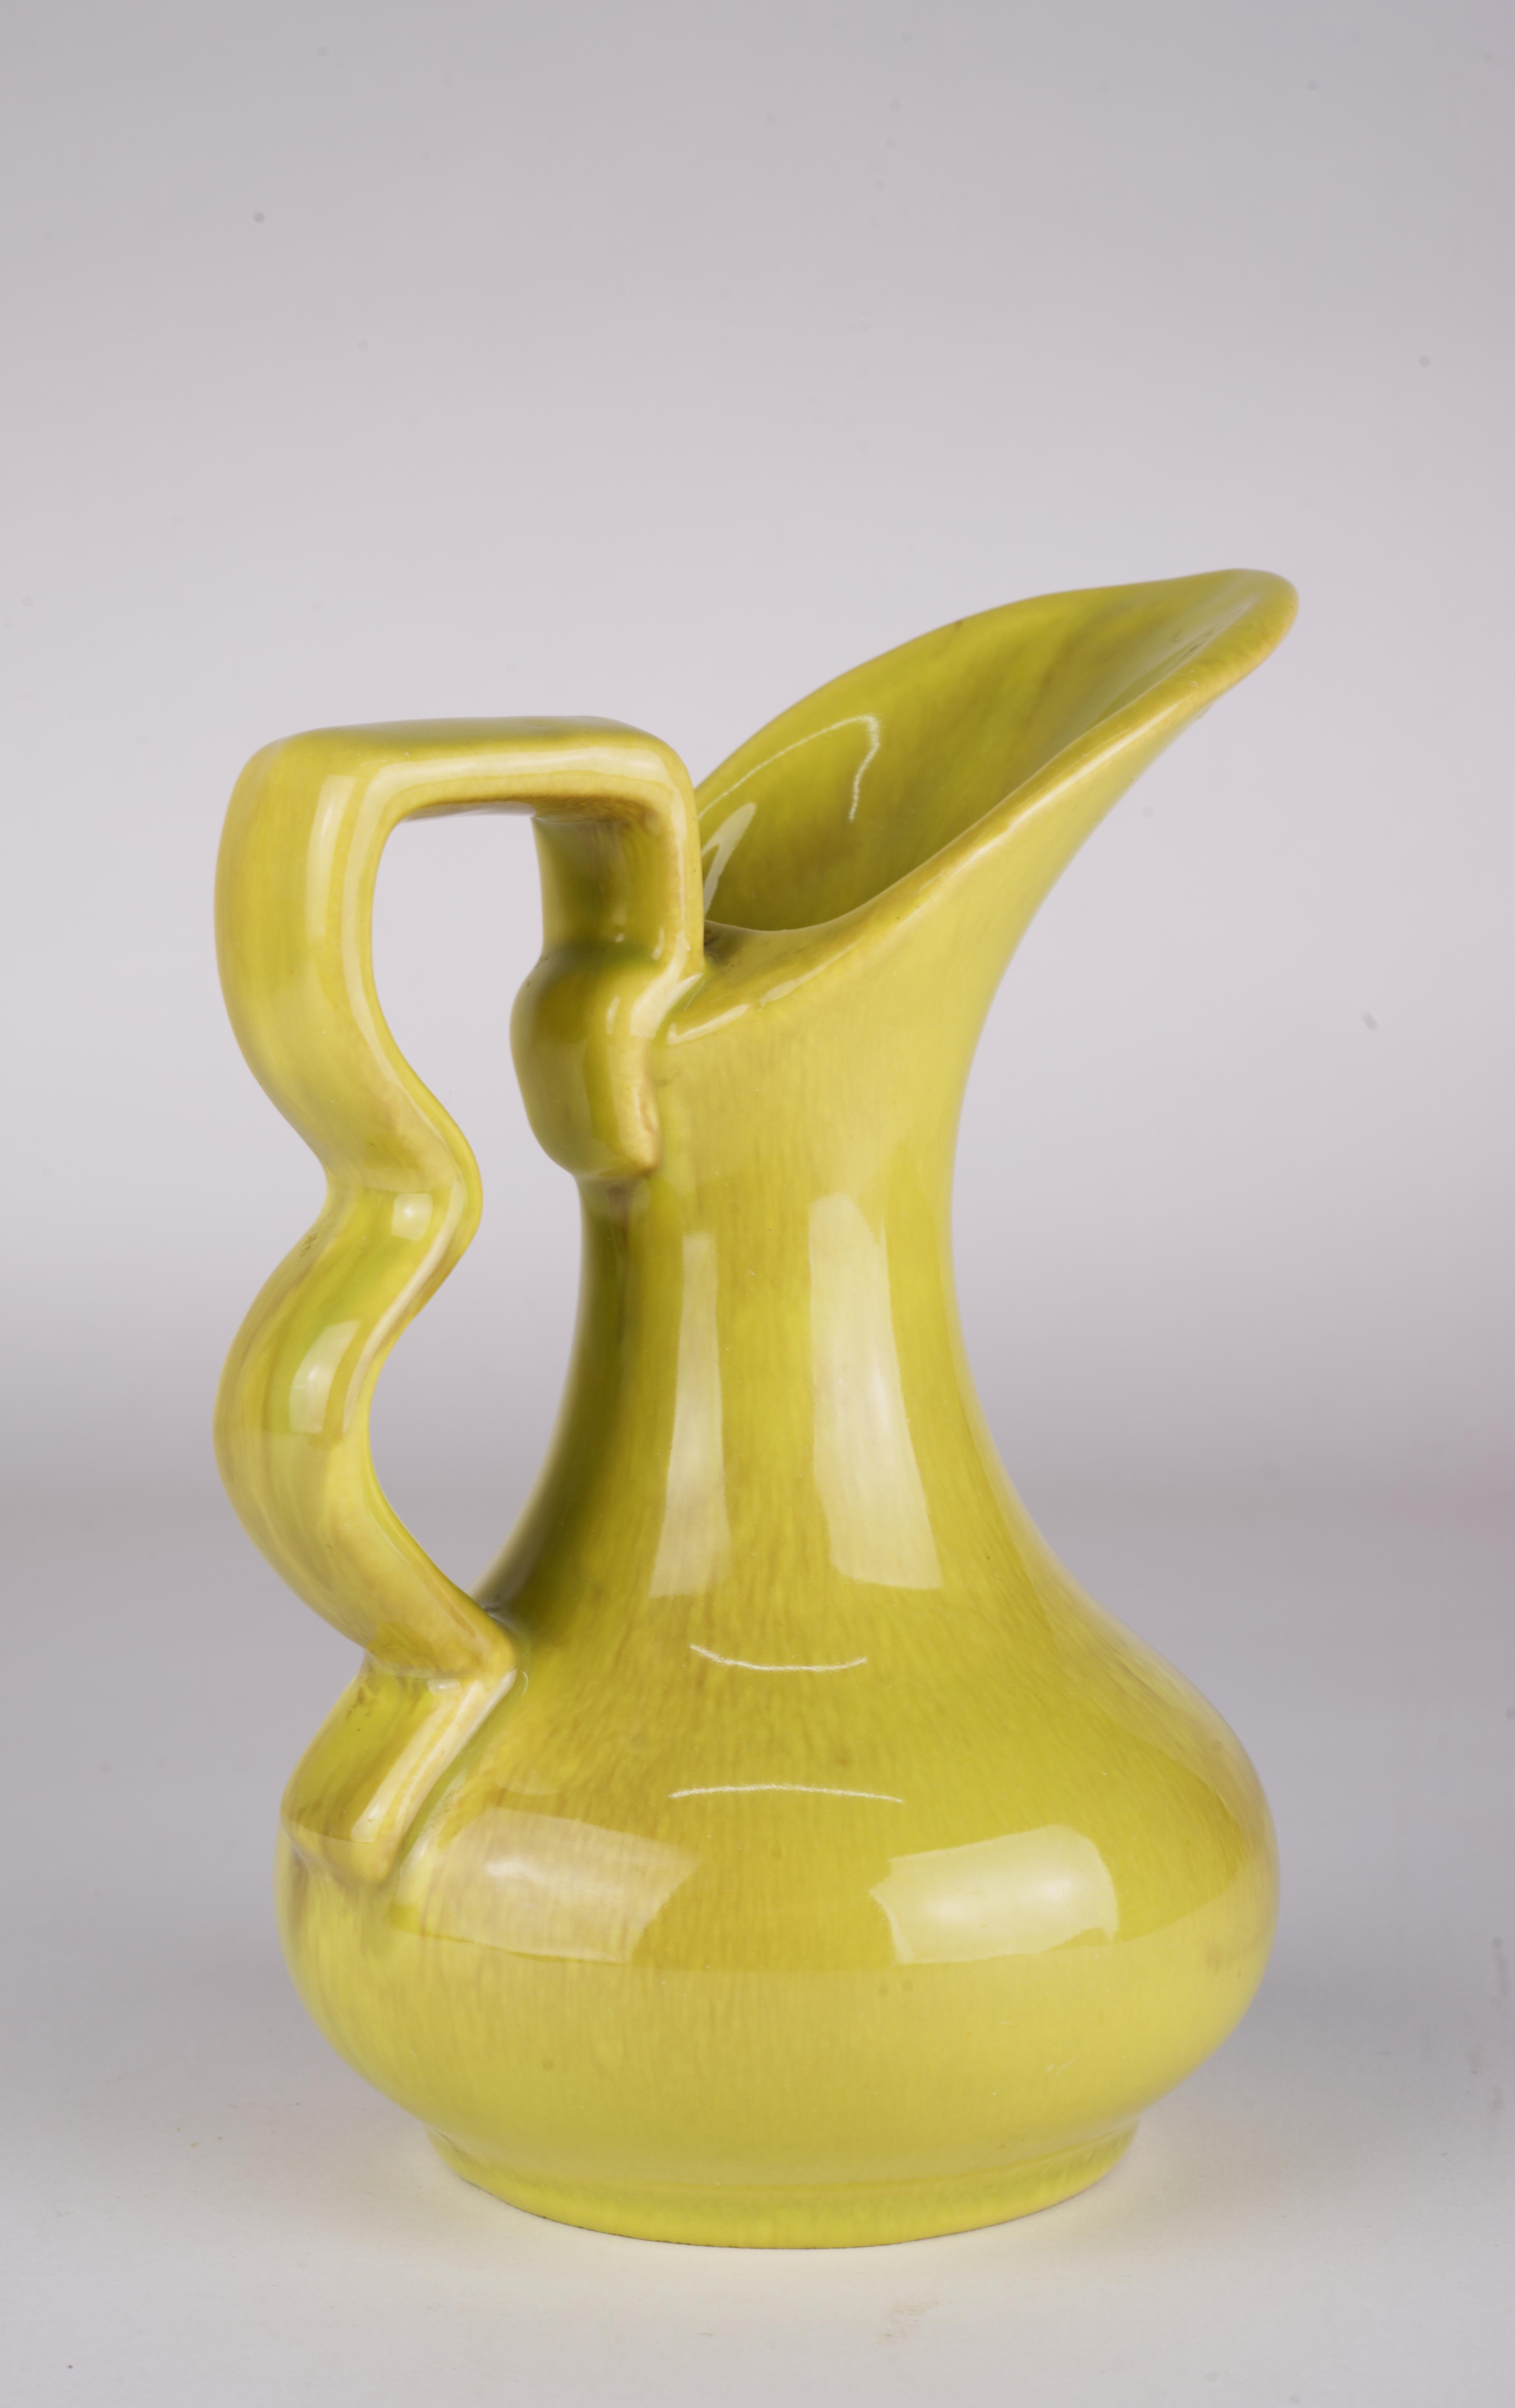 Gonder Pottery Bud Vase Ewer in Chartreuse Drip Glaze 1940s-1950s For Sale 2